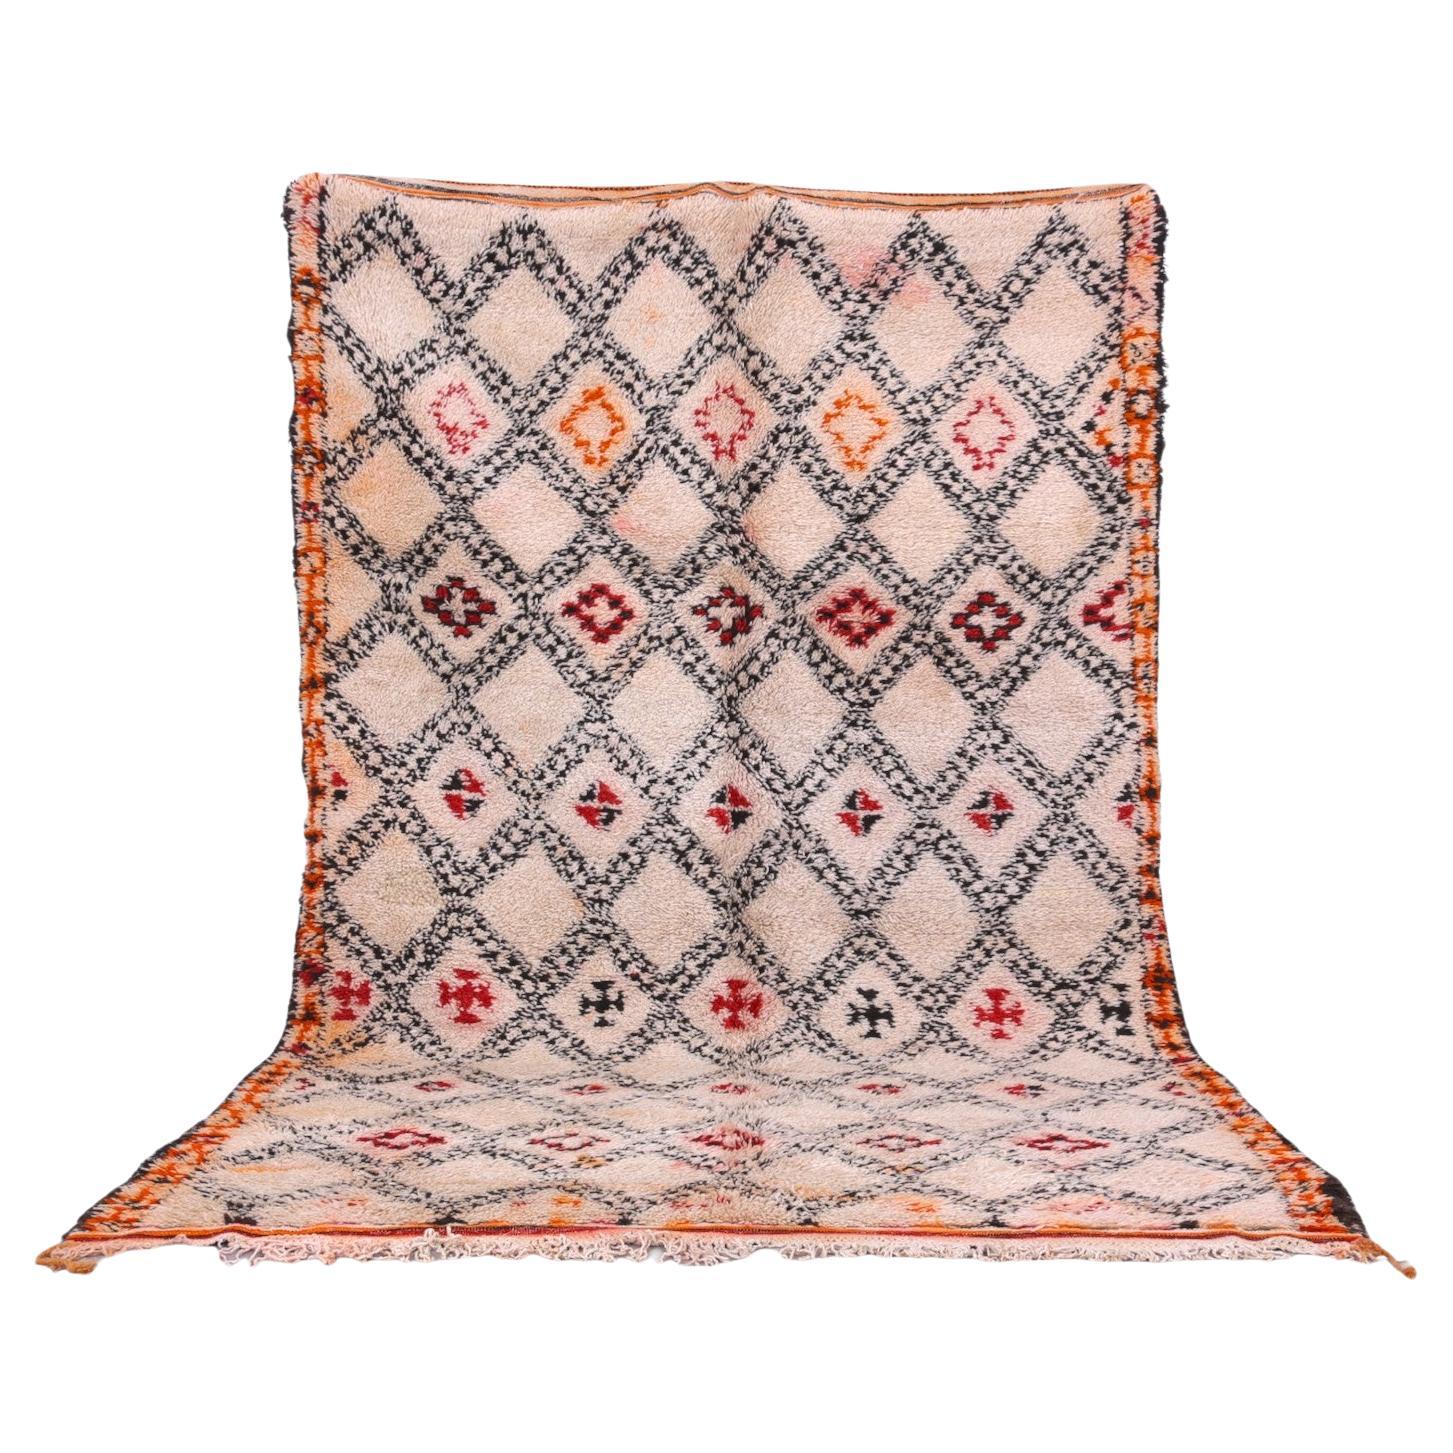 Vintage Beni Ourain Moroccan Rug, Mid-Century Modern Style For Sale